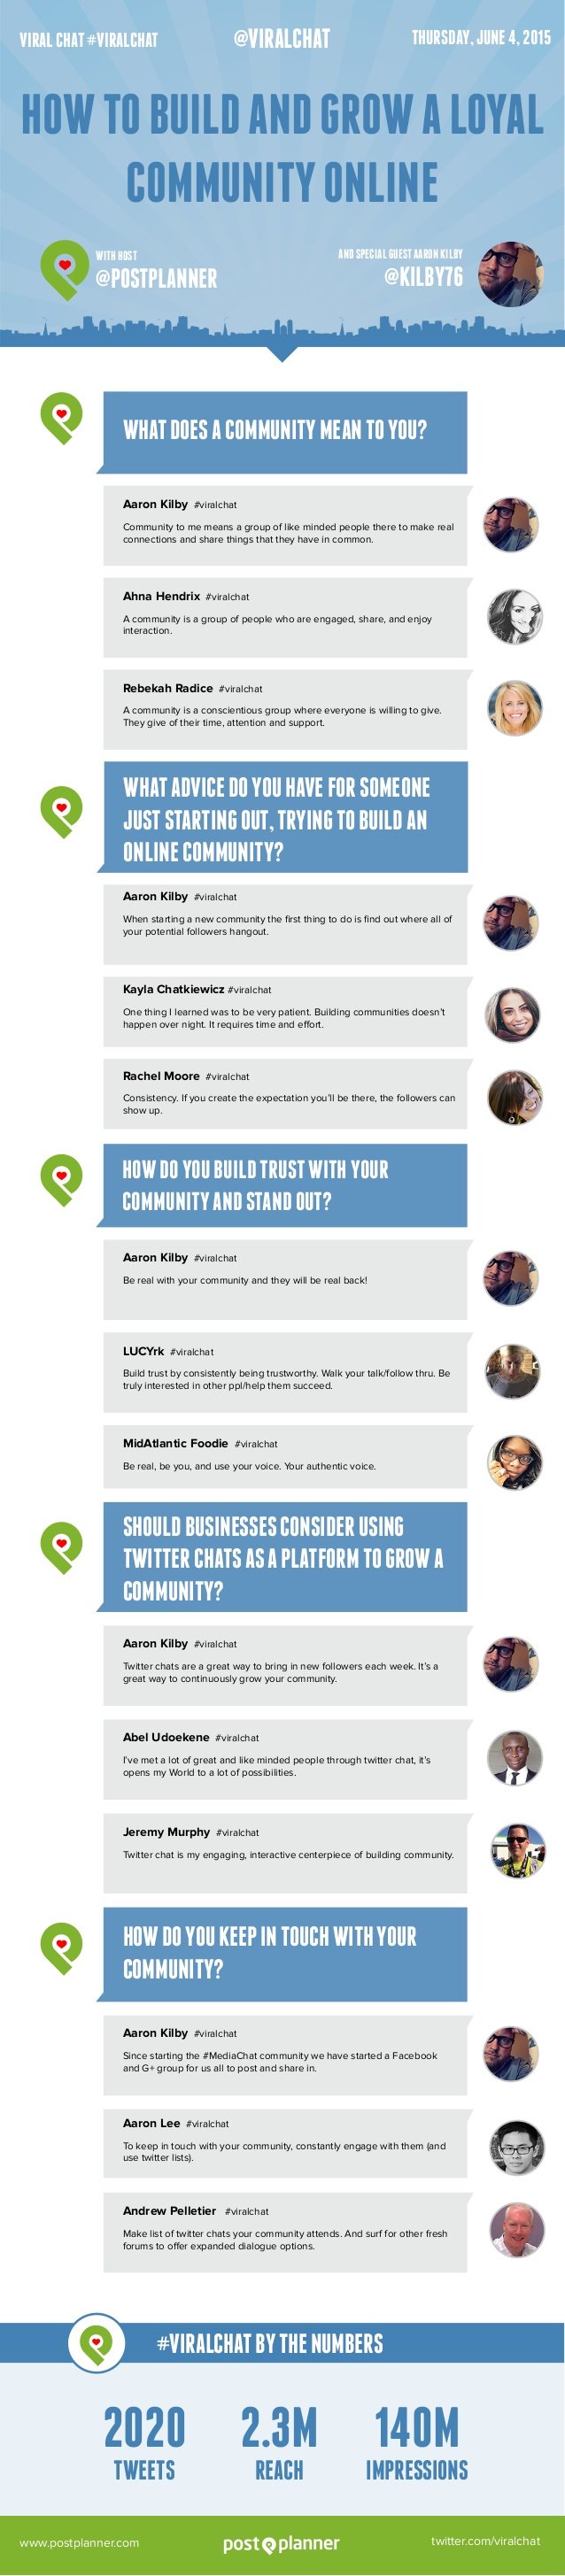 how-to-build-and-grow-a-loyal-community-online-with-aaron-kilby-viralchat-1-638